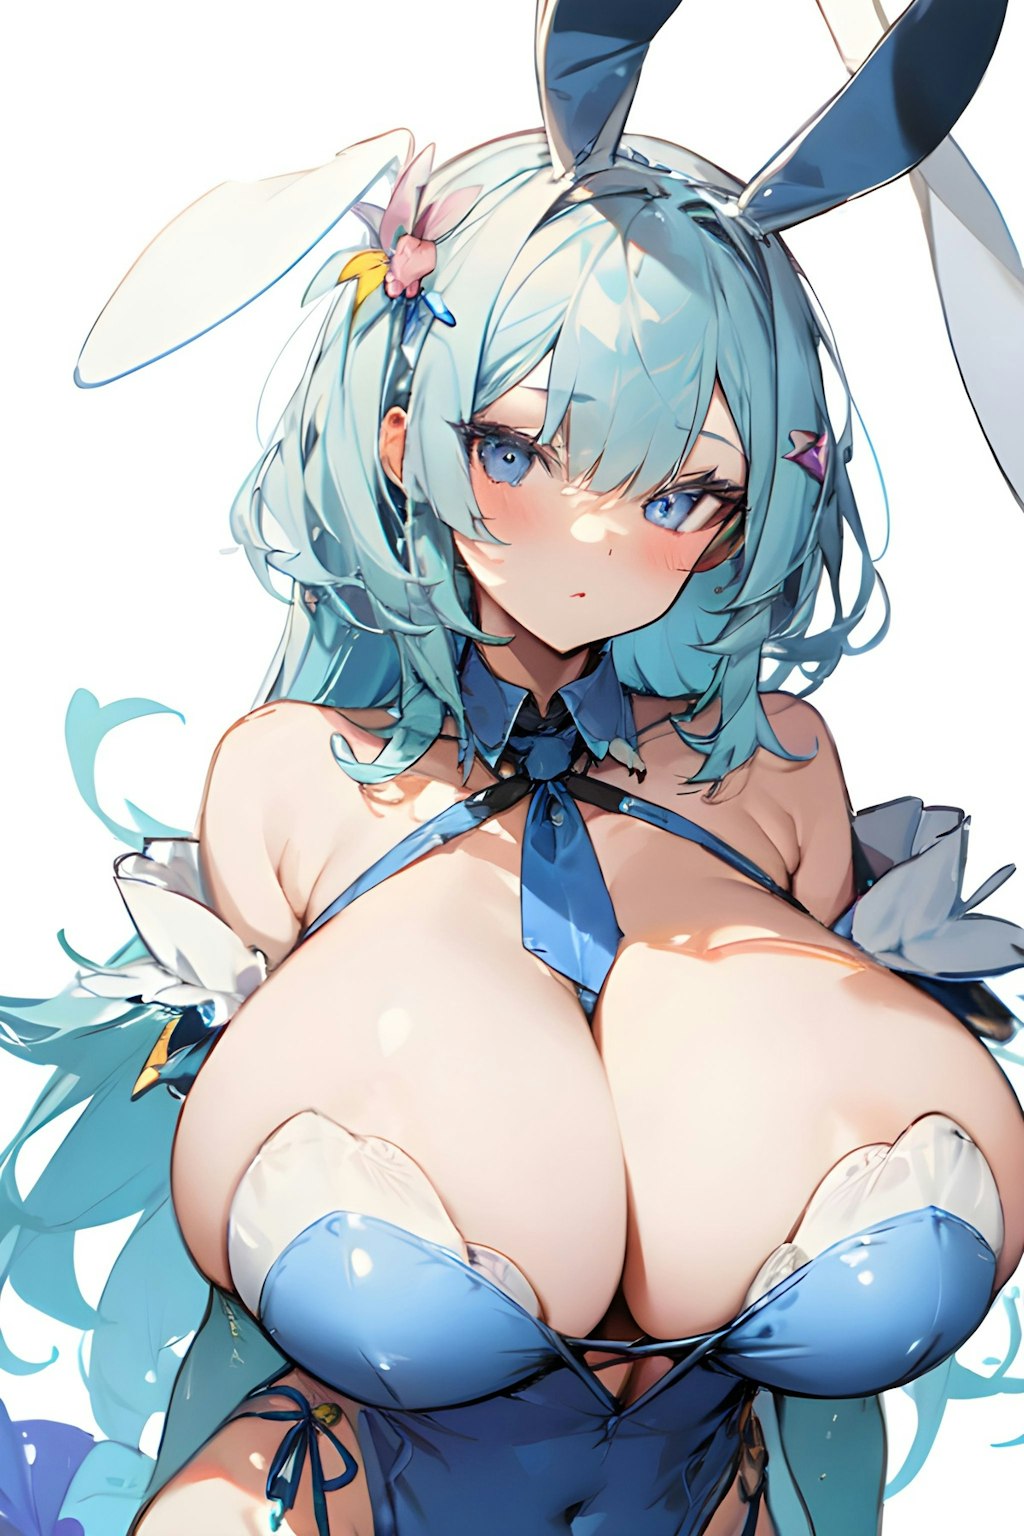 Better Sweet Bunny/Blue edition